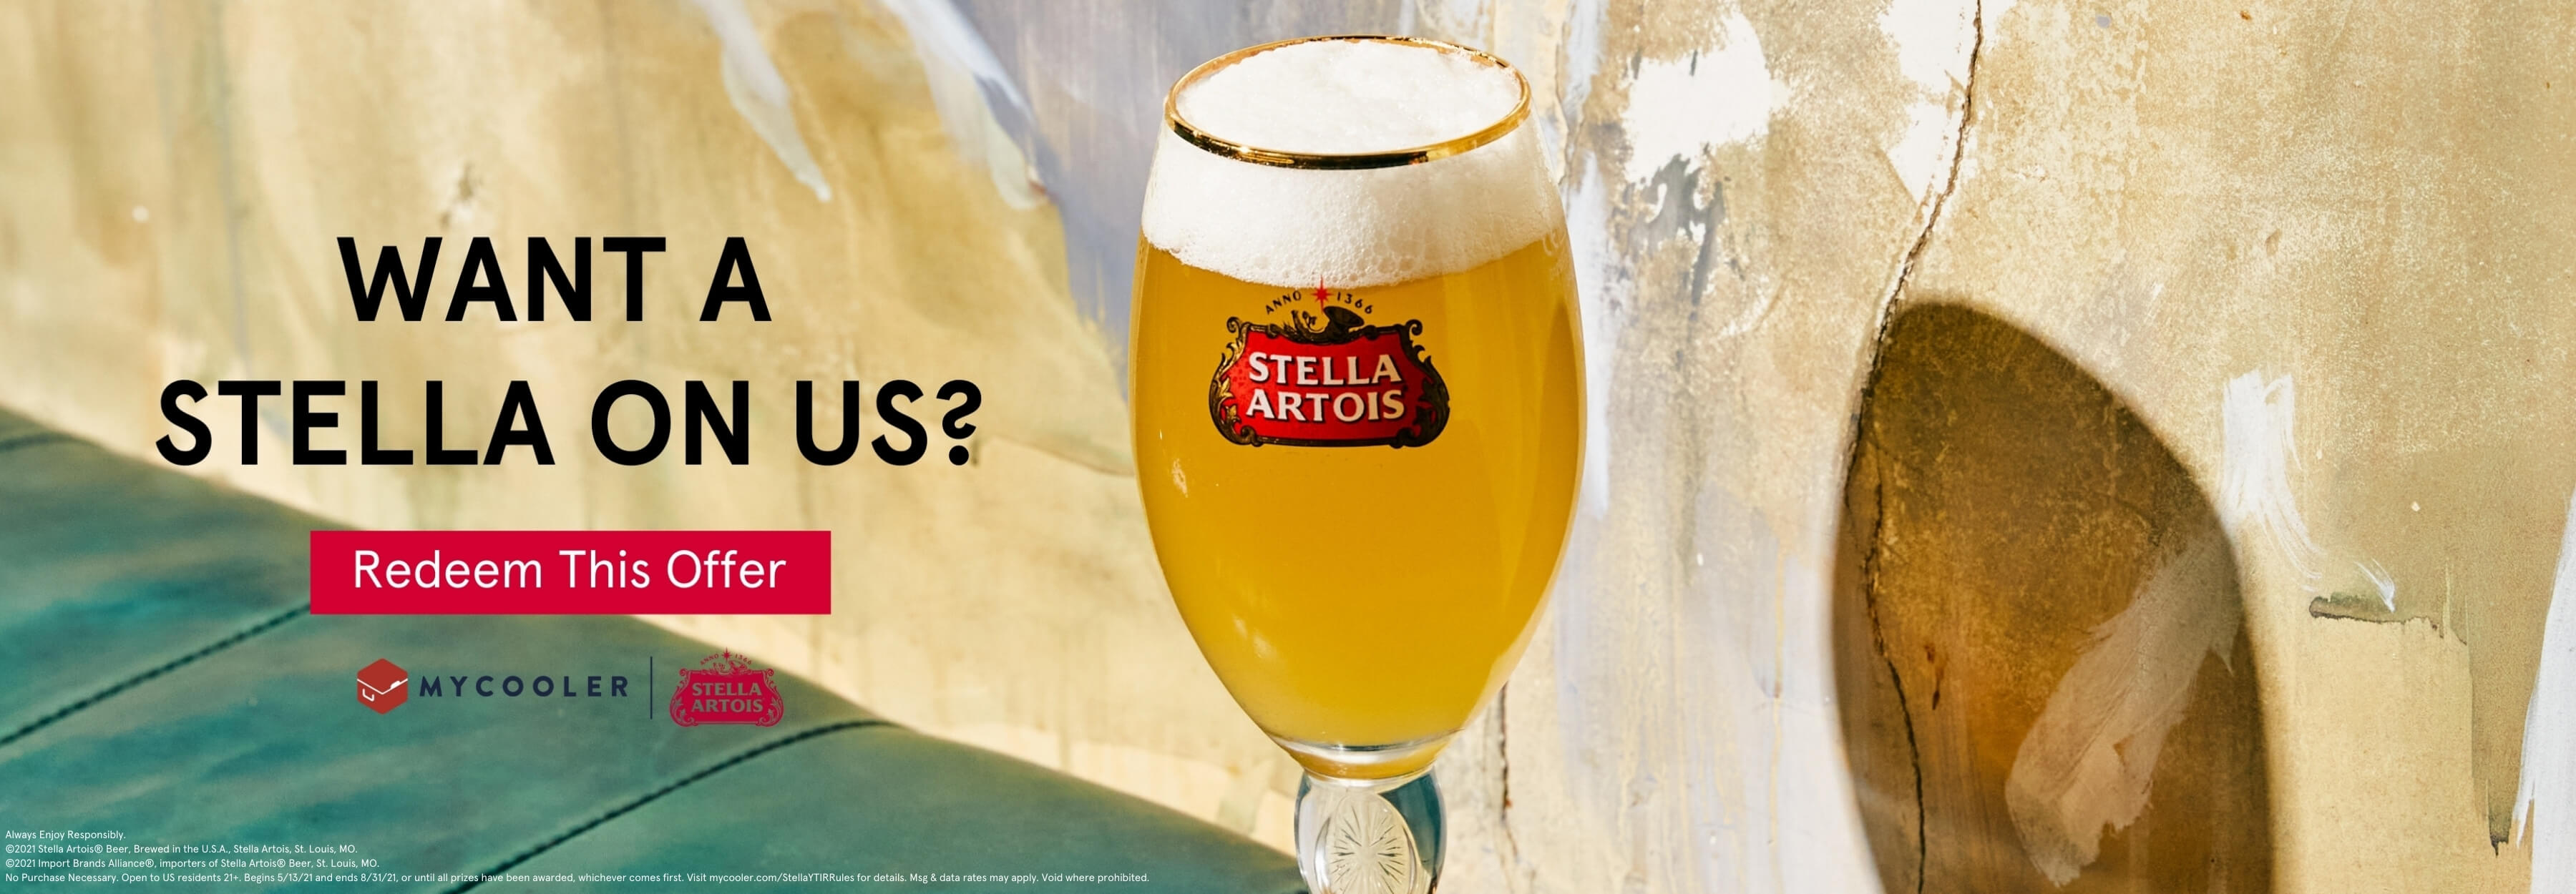 Your table is ready in The Life Artois